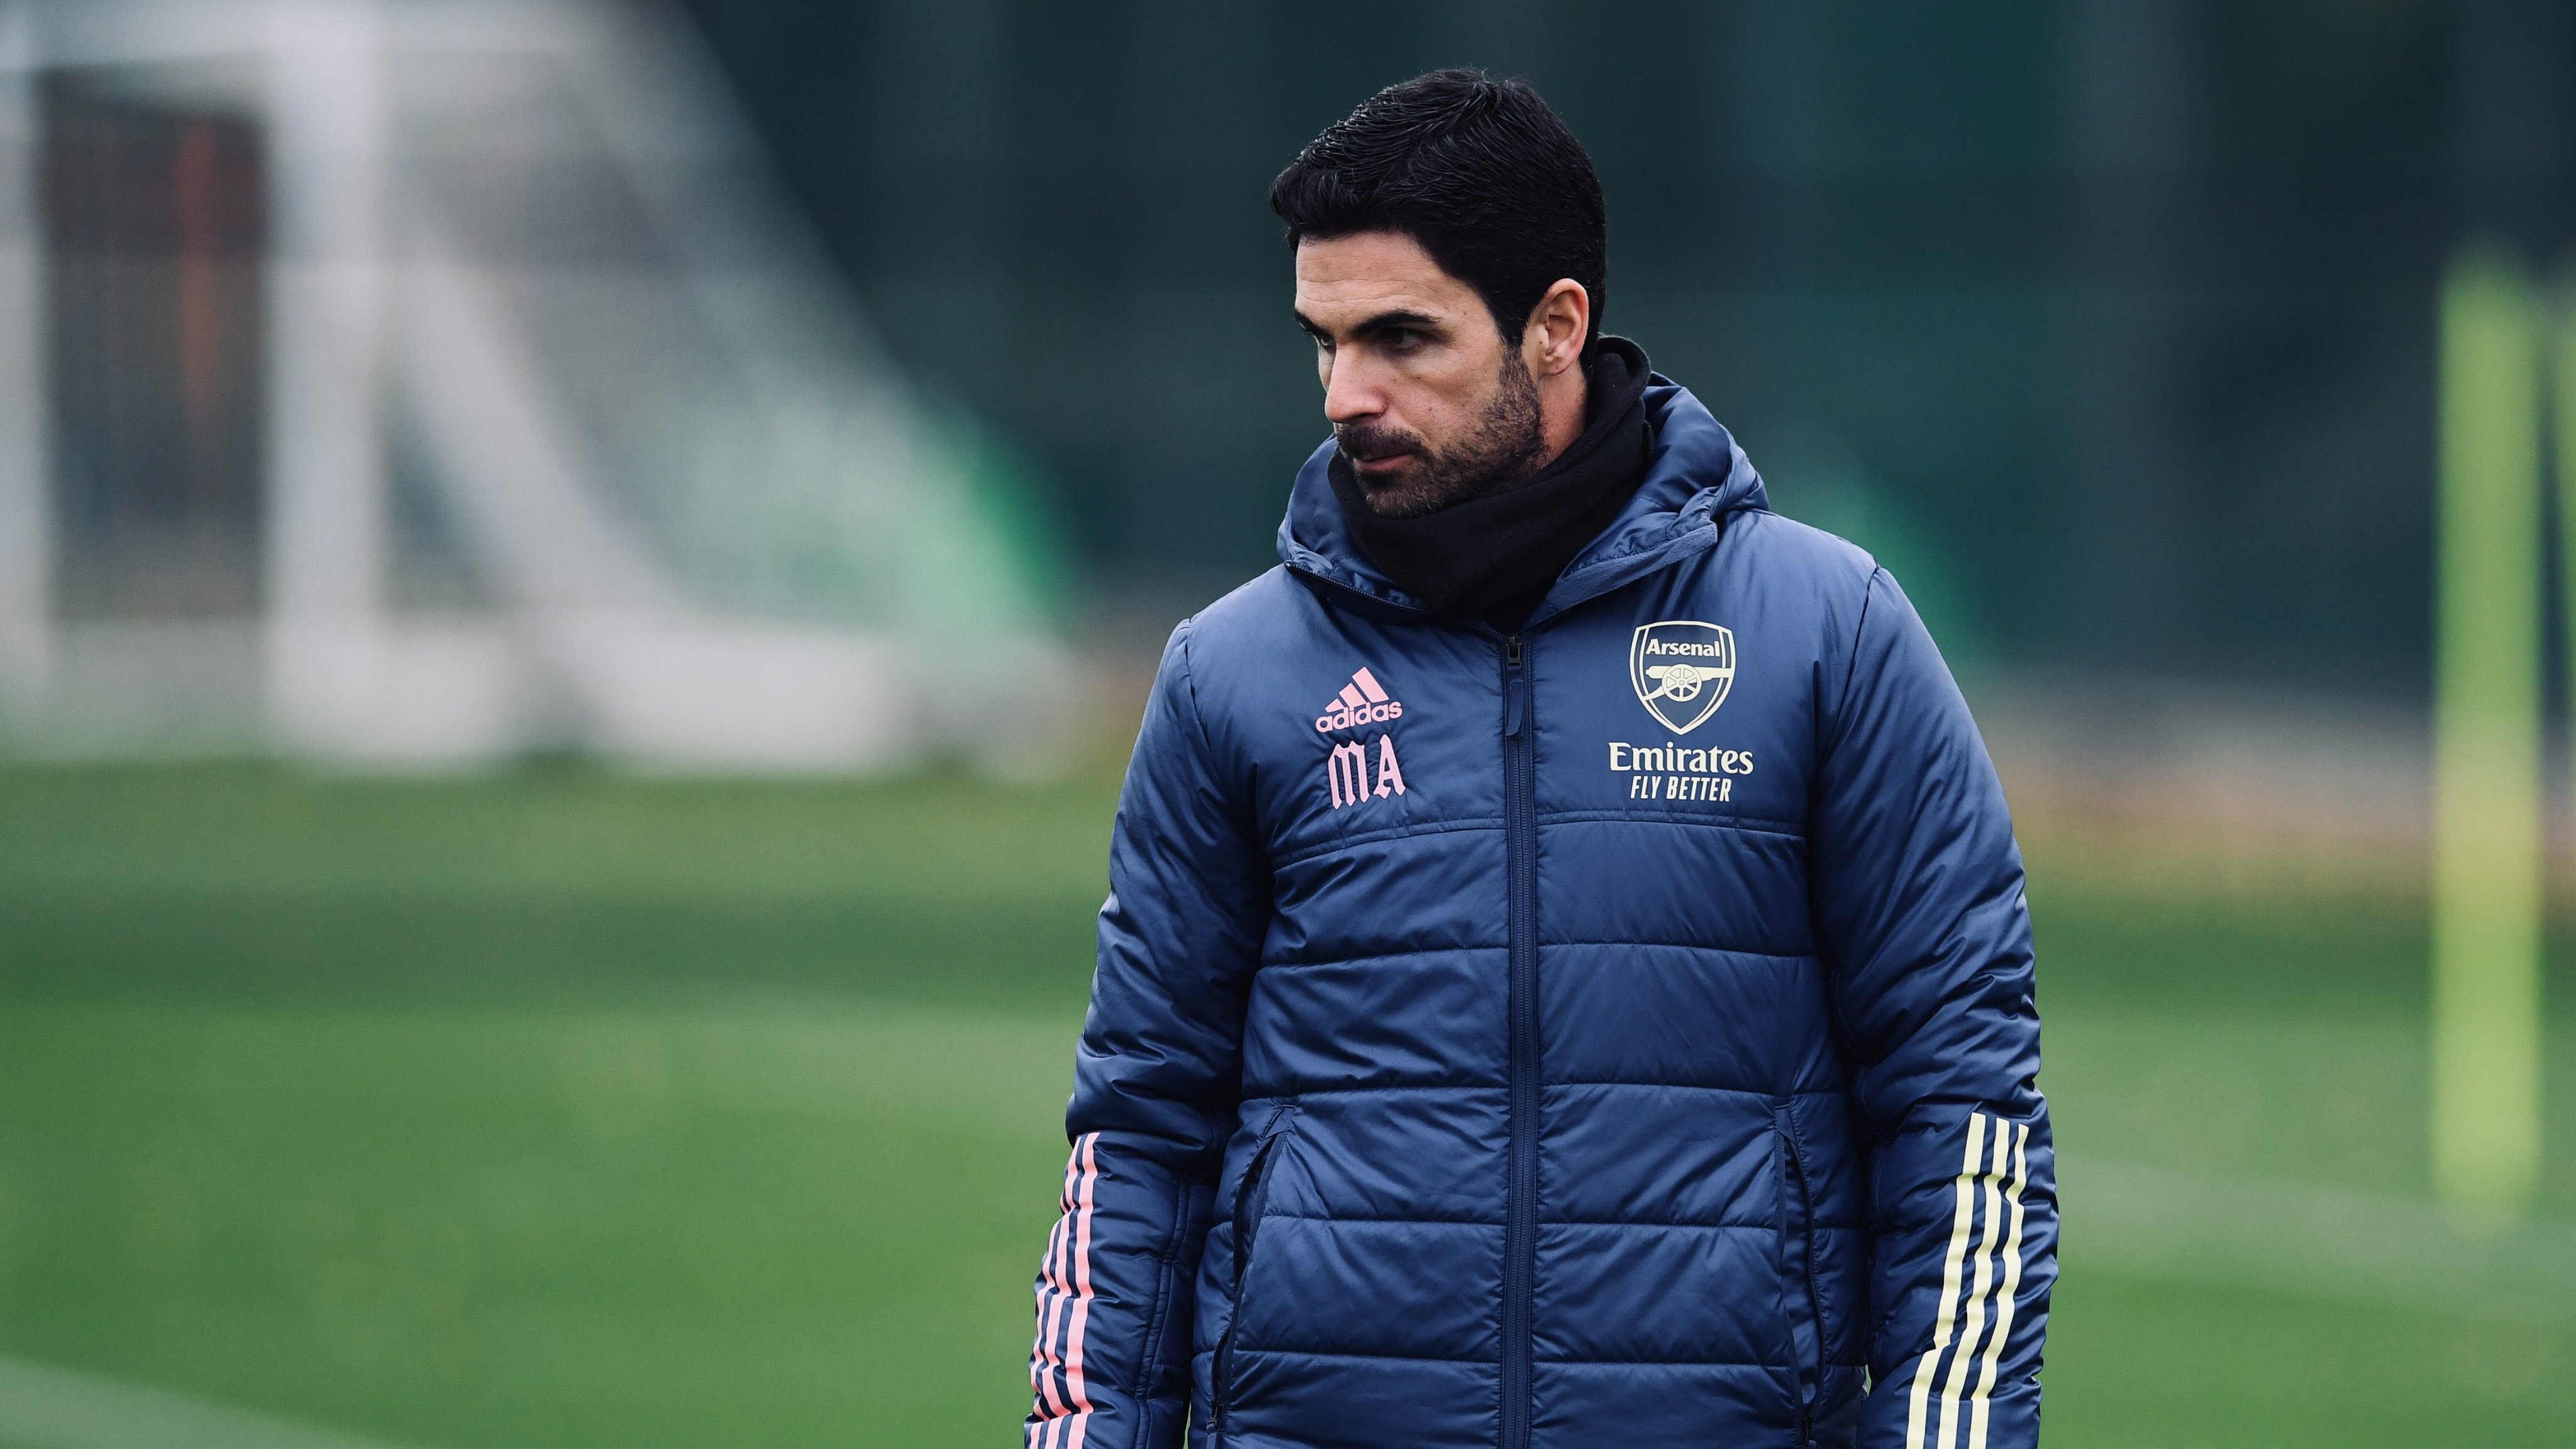 We have to focus on pitch because that’s best to help the club, asserts Mikel Arteta